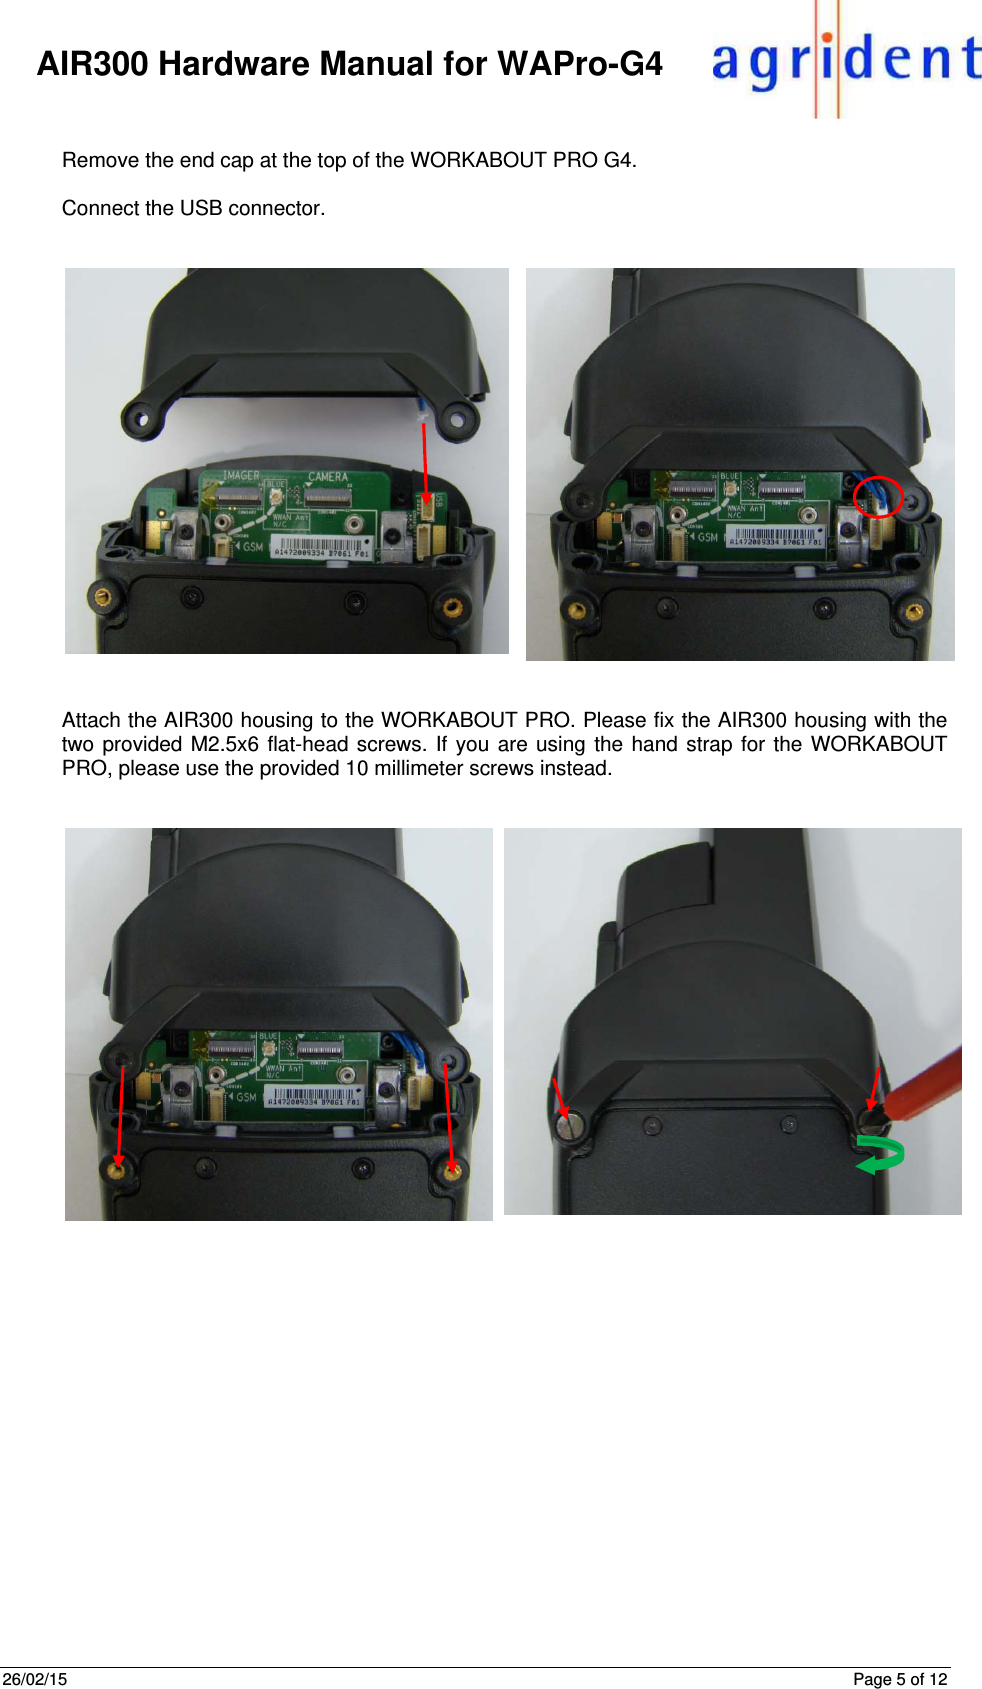 26/02/15      Page 5 of 12     AIR300 Hardware Manual for WAPro-G4  Remove the end cap at the top of the WORKABOUT PRO G4.  Connect the USB connector.      Attach the AIR300 housing to the WORKABOUT PRO. Please fix the AIR300 housing with the two provided M2.5x6 flat-head screws. If you are using the hand strap for the WORKABOUT PRO, please use the provided 10 millimeter screws instead.       